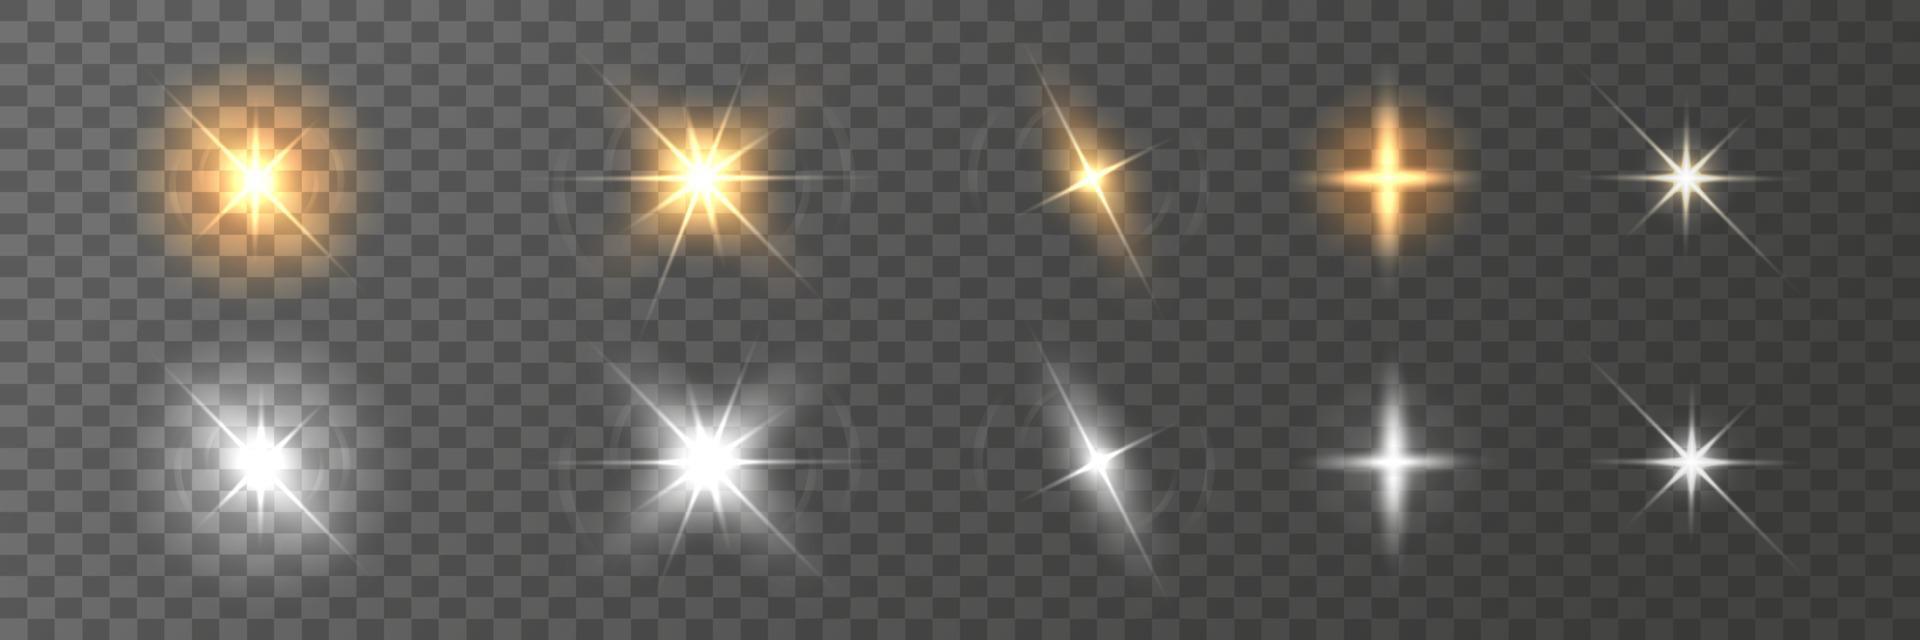 Background with glowing lights. Set of shiny highlights, stars, flares. Solar golden flash effect on dark background. Collection of gold and silver sequins. Vector illustration.